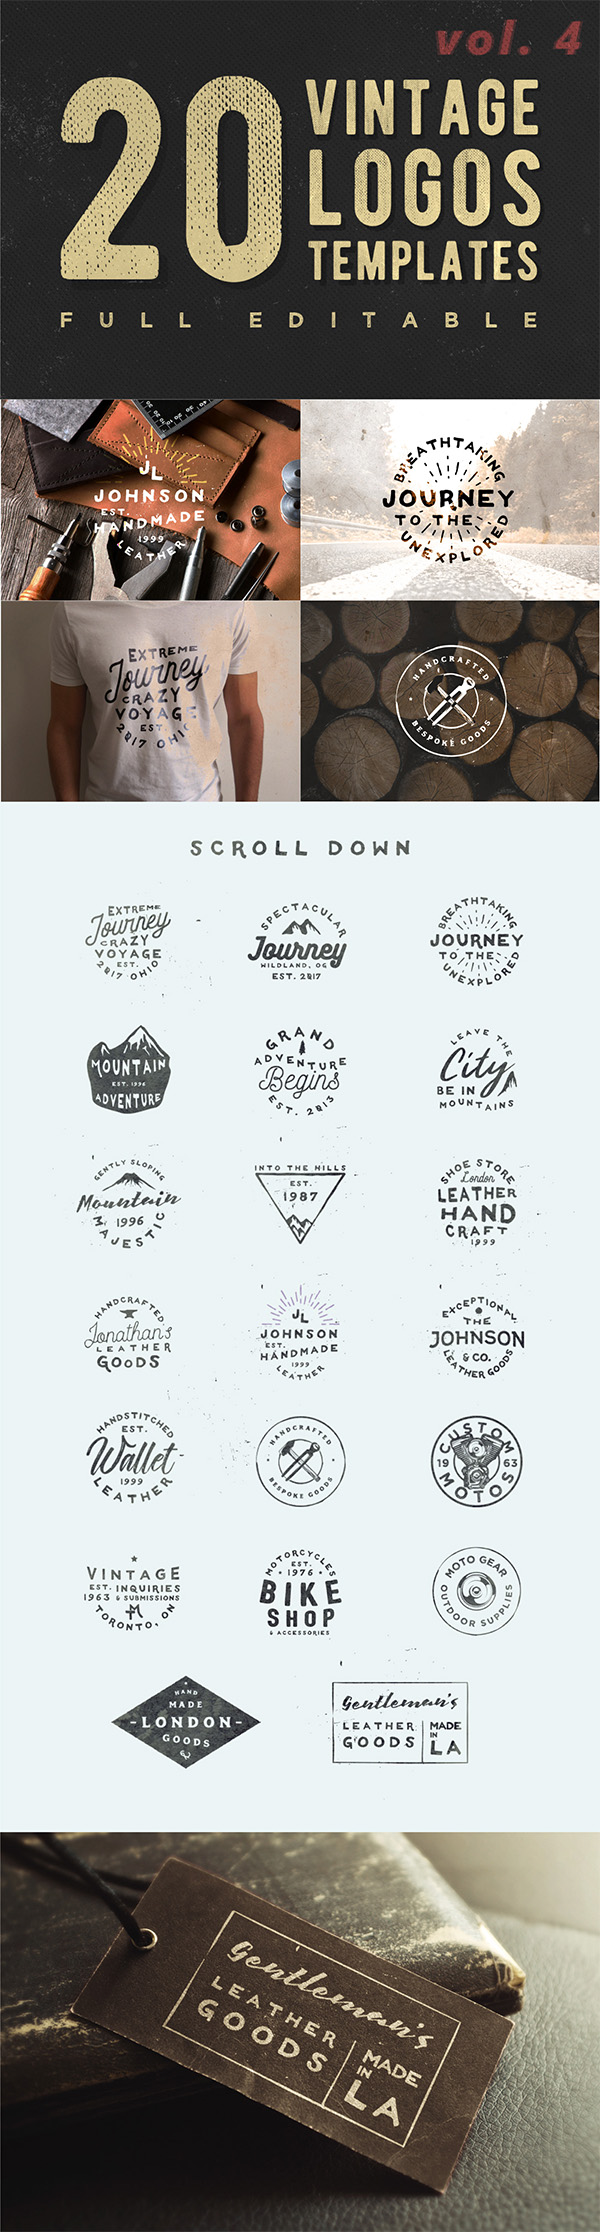 65 Free Vintage Logo Templates and Badges Graphic Design Junction